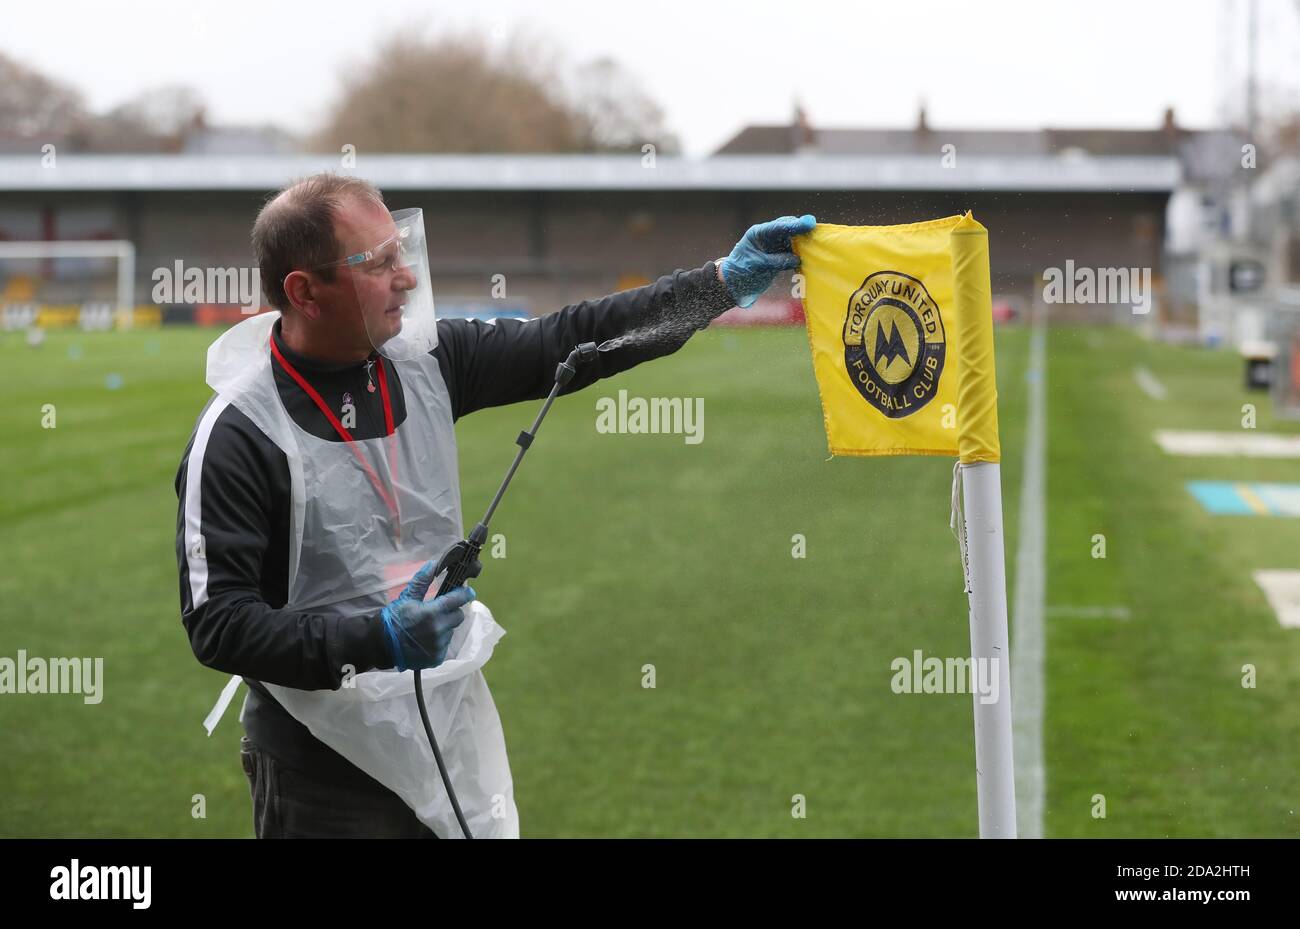 A official wearing PPE sprays the corner flag with disinfectant spray before the First round of the Emirates FA Cup between Torquay United and Crawley Town at Plainmoor, Torquay.  Picture James Boardman / Telephoto Images Stock Photo